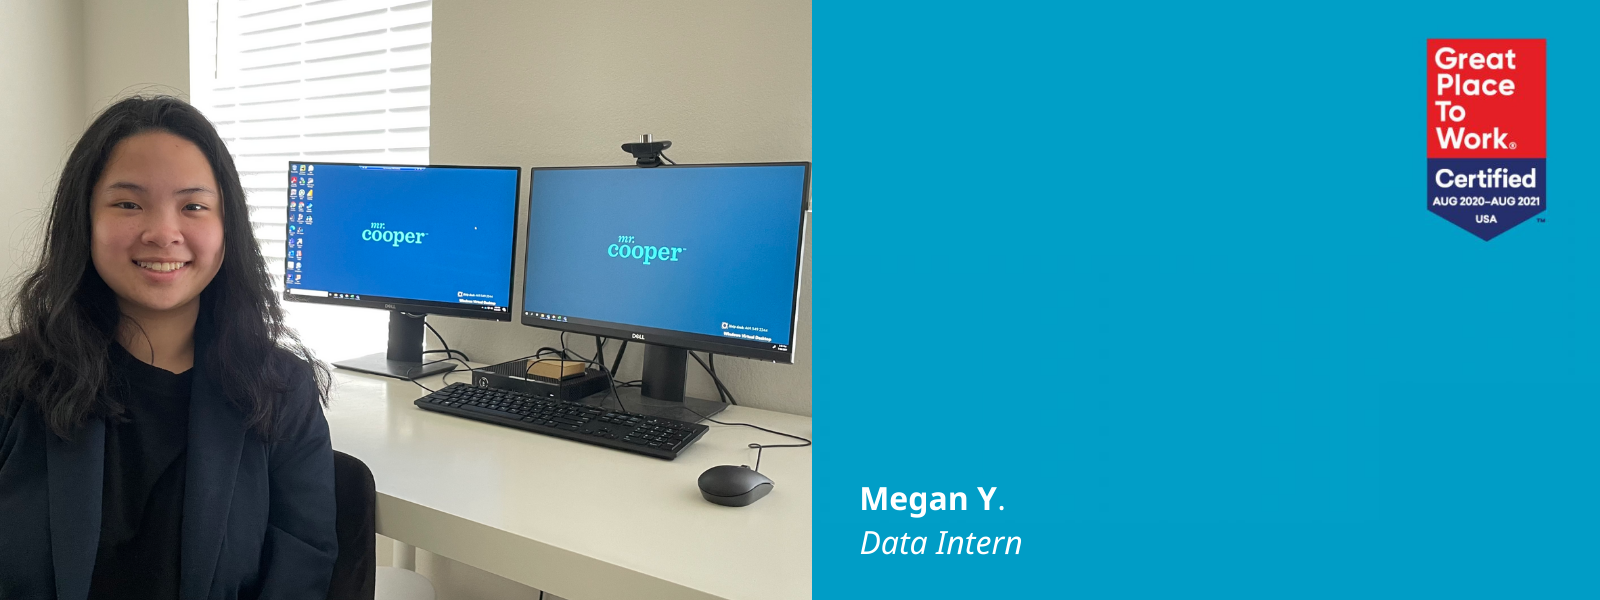 Photo of Megan Yiu in a home office next to a blue box with a Great Place To Work Certified logo and text: Megan Y., Data Intern.